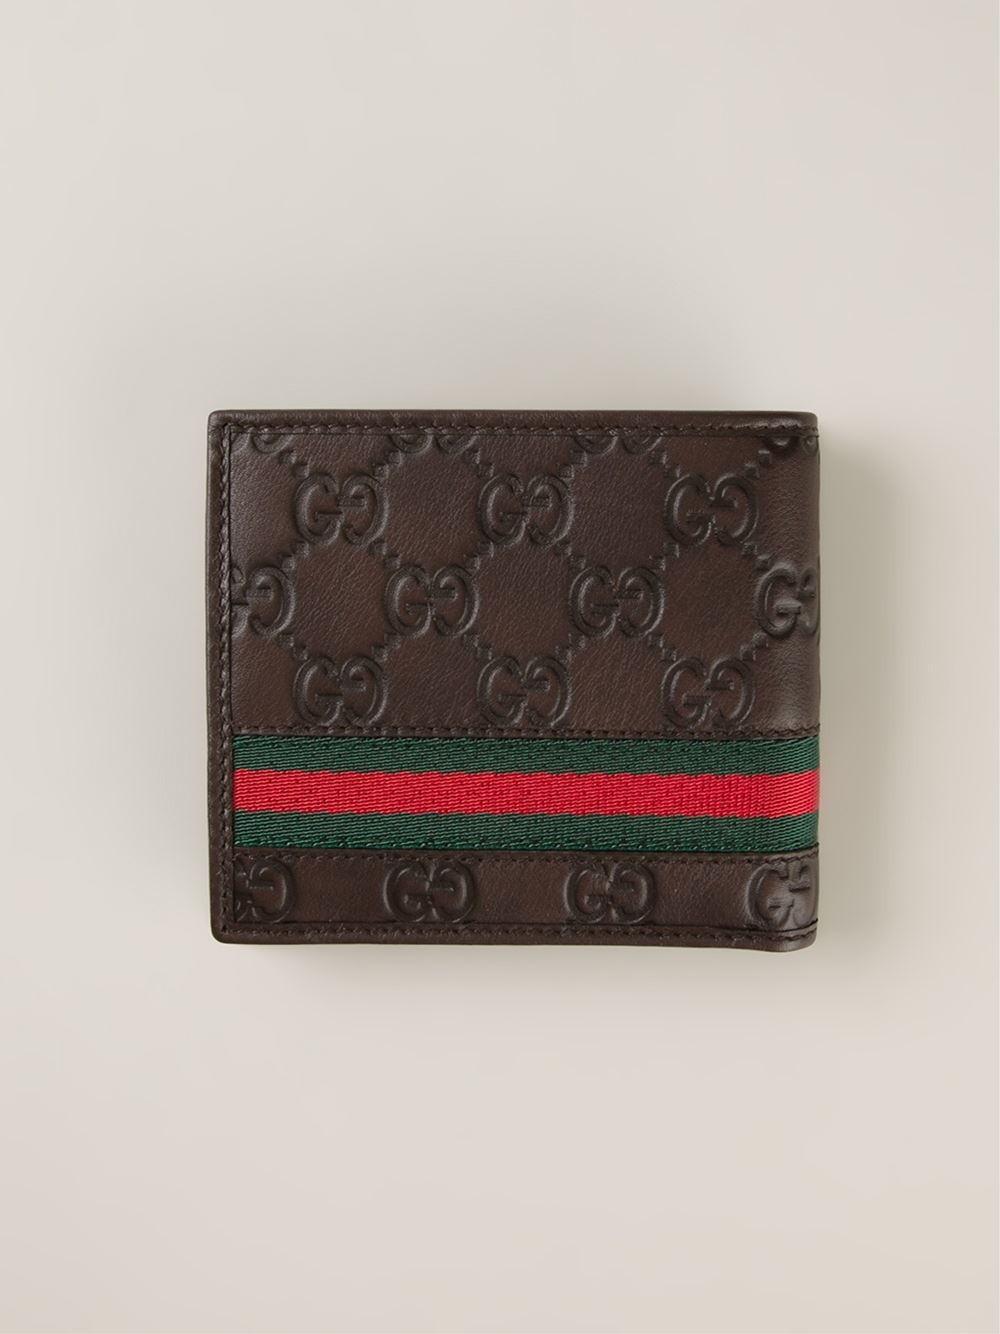 gucci-brown-logo-embossed-wallet-product-1-27241541-1-785468987-normal.jpeg